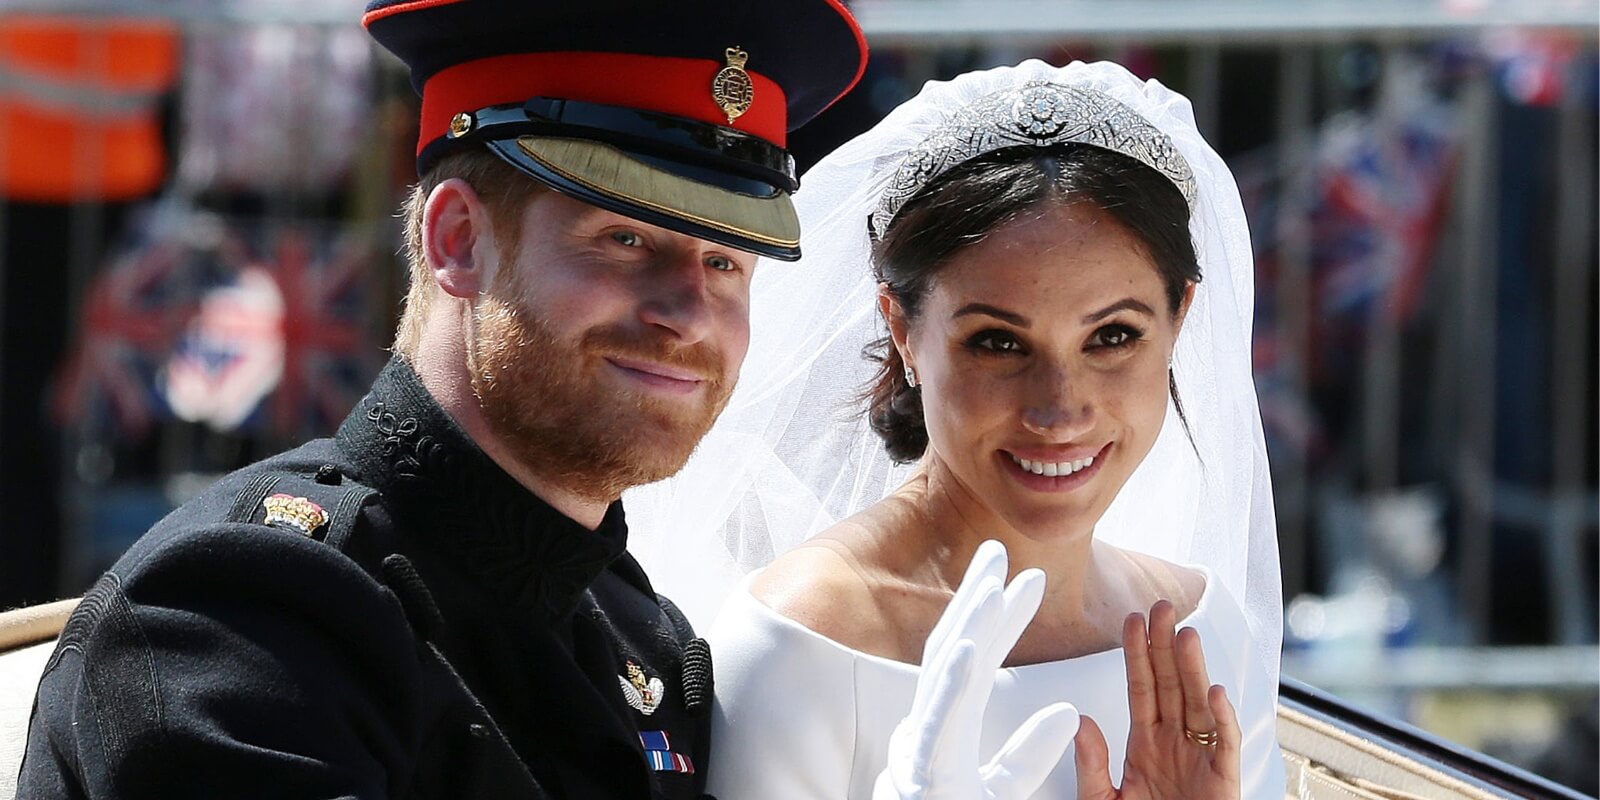 Prince Harry and Meghan Markle photographed during their 2018 wedding.